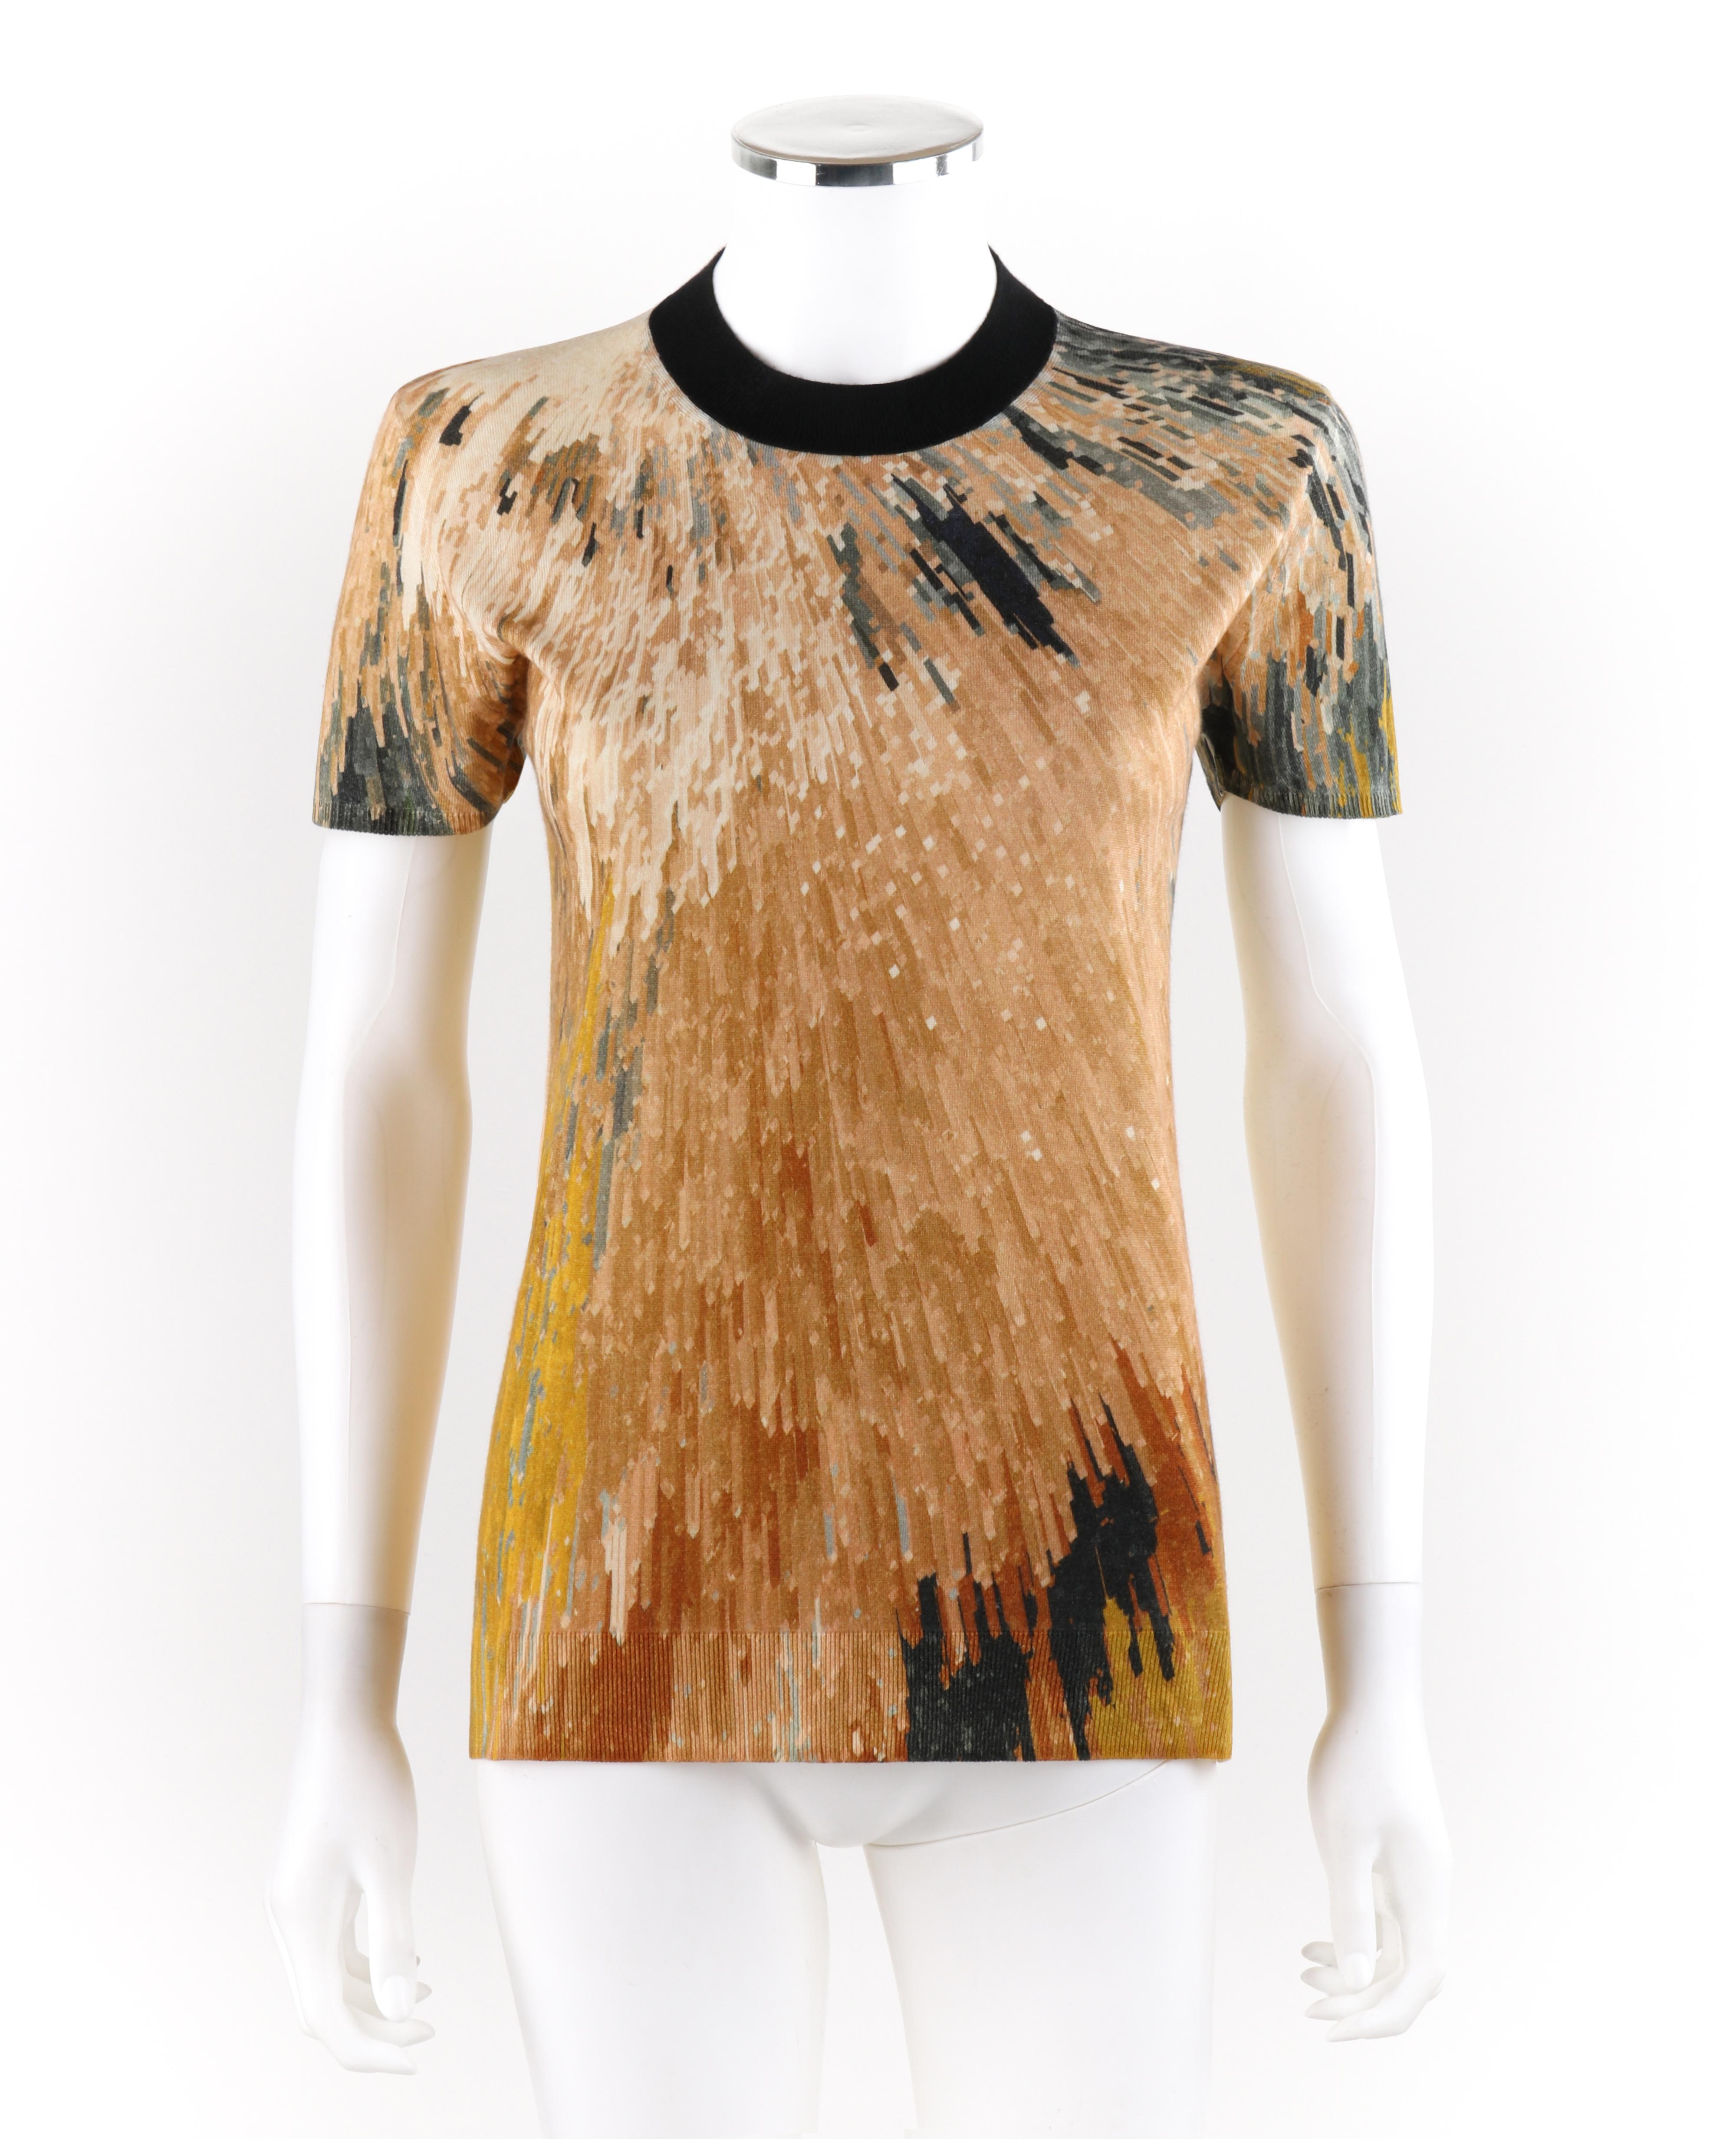 FENDI S/S 2013 Silk Cashmere Abstract Pixel Print Jersey Knit T-Shirt Top SS

Brand / Manufacturer: Fendi
Collection: S/S 2013
Designer: Karl Lagerfeld, Silvia Venturini Fendi
Style: Short sleeve knit
Color(s): Shades of cream, tan, green, yellow